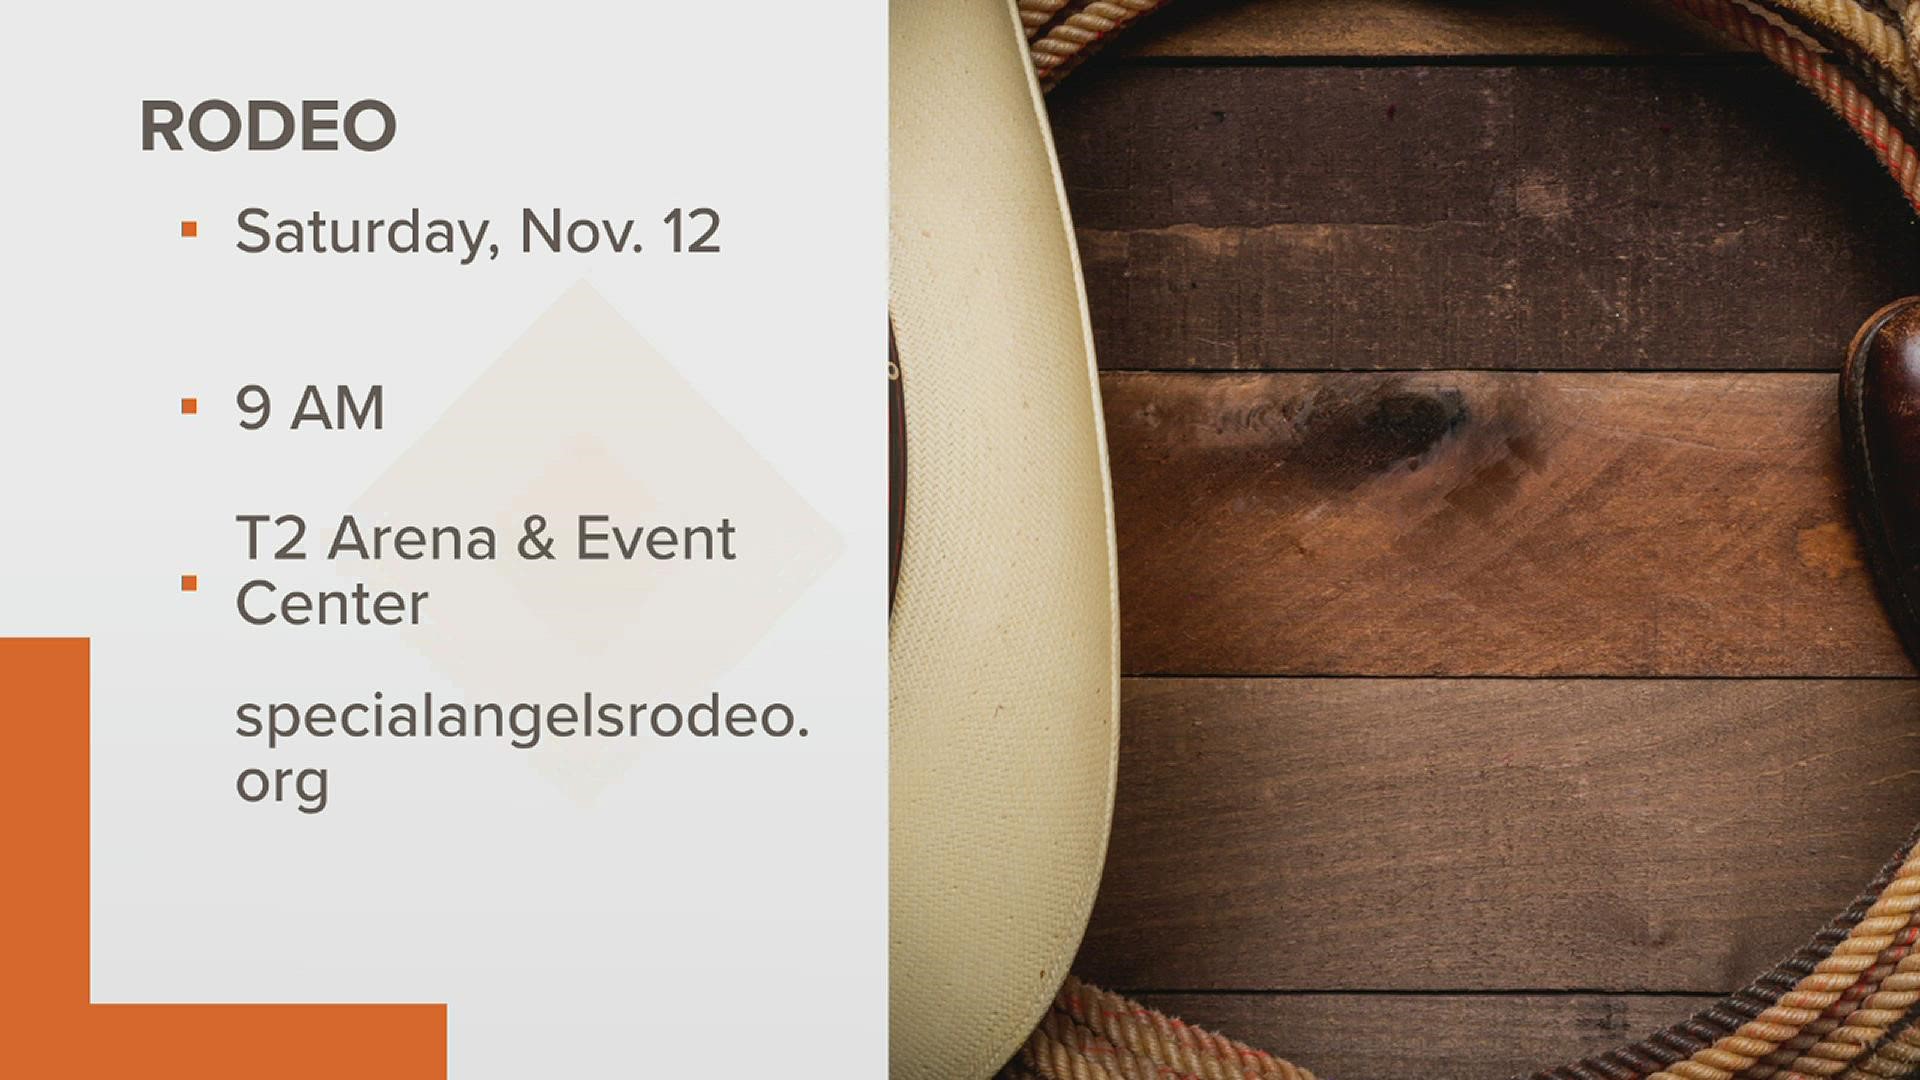 The "Special Angels Rodeo" kicks off on Saturday, Nov. 12, at 9 a.m. at Orange County's T2 Arena  to help bring a western experience to those with special needs.